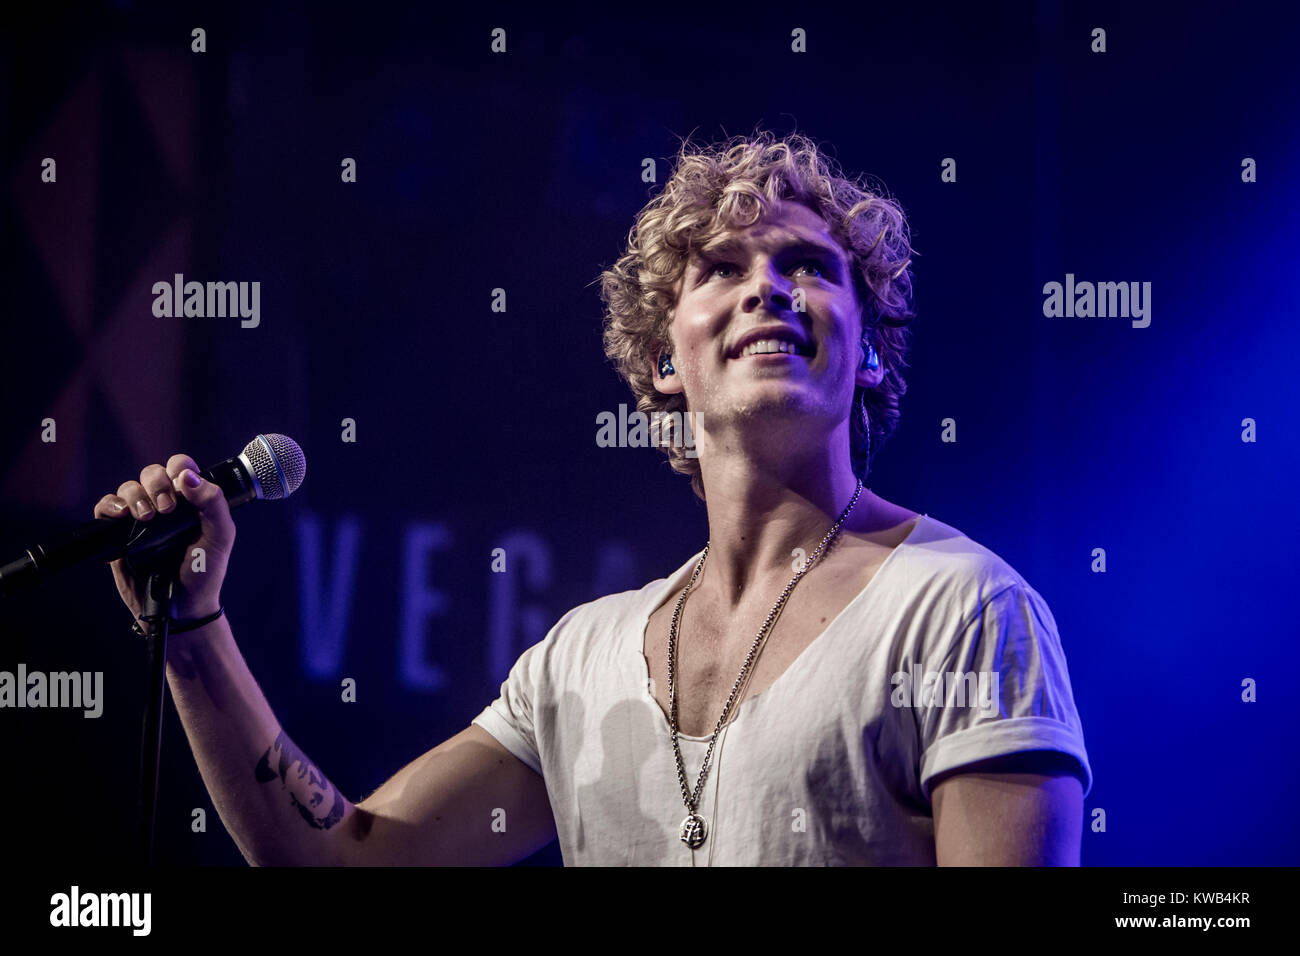 krab Goodwill bedelaar The Danish pop singer, songwriter and teenage idol Christopher Lund Nissen  is best known as just Christopher and here performs a live concert at Vega  in Copenhagen. Denmark 04/04 2014 Stock Photo - Alamy